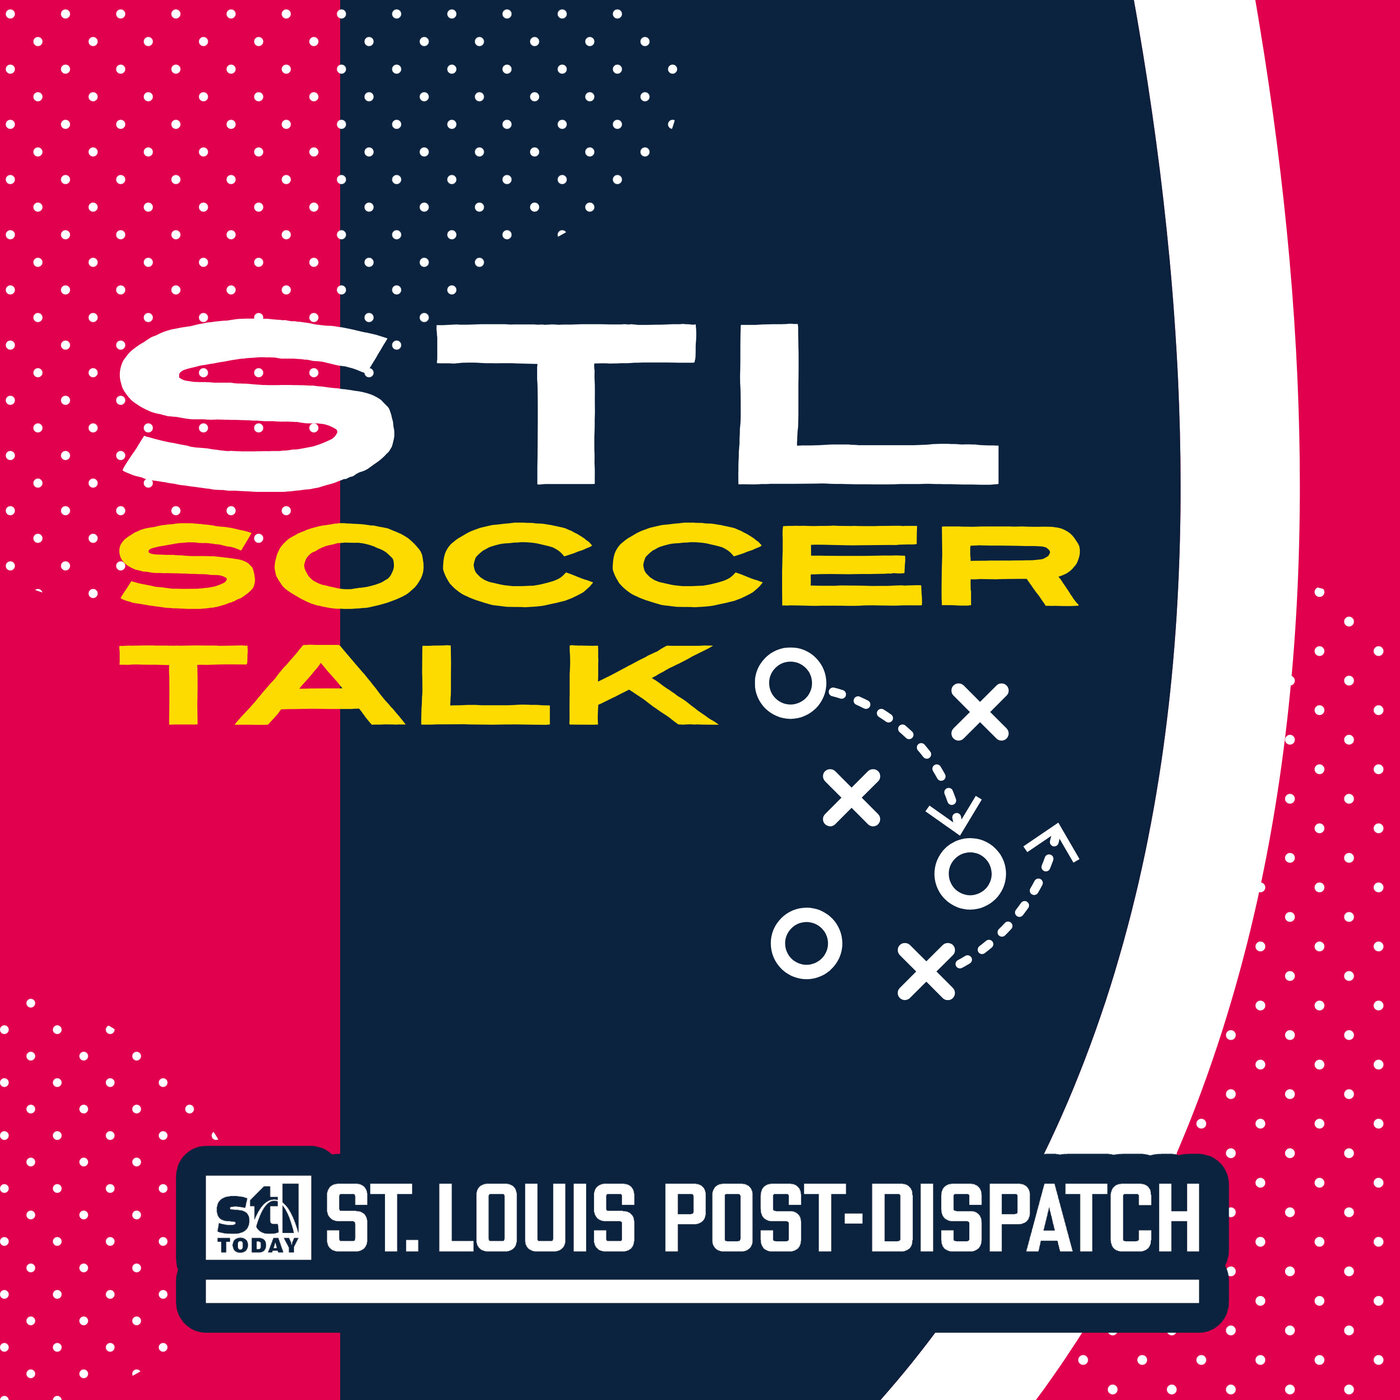 A tie, and a loss, for St. Louis City SC